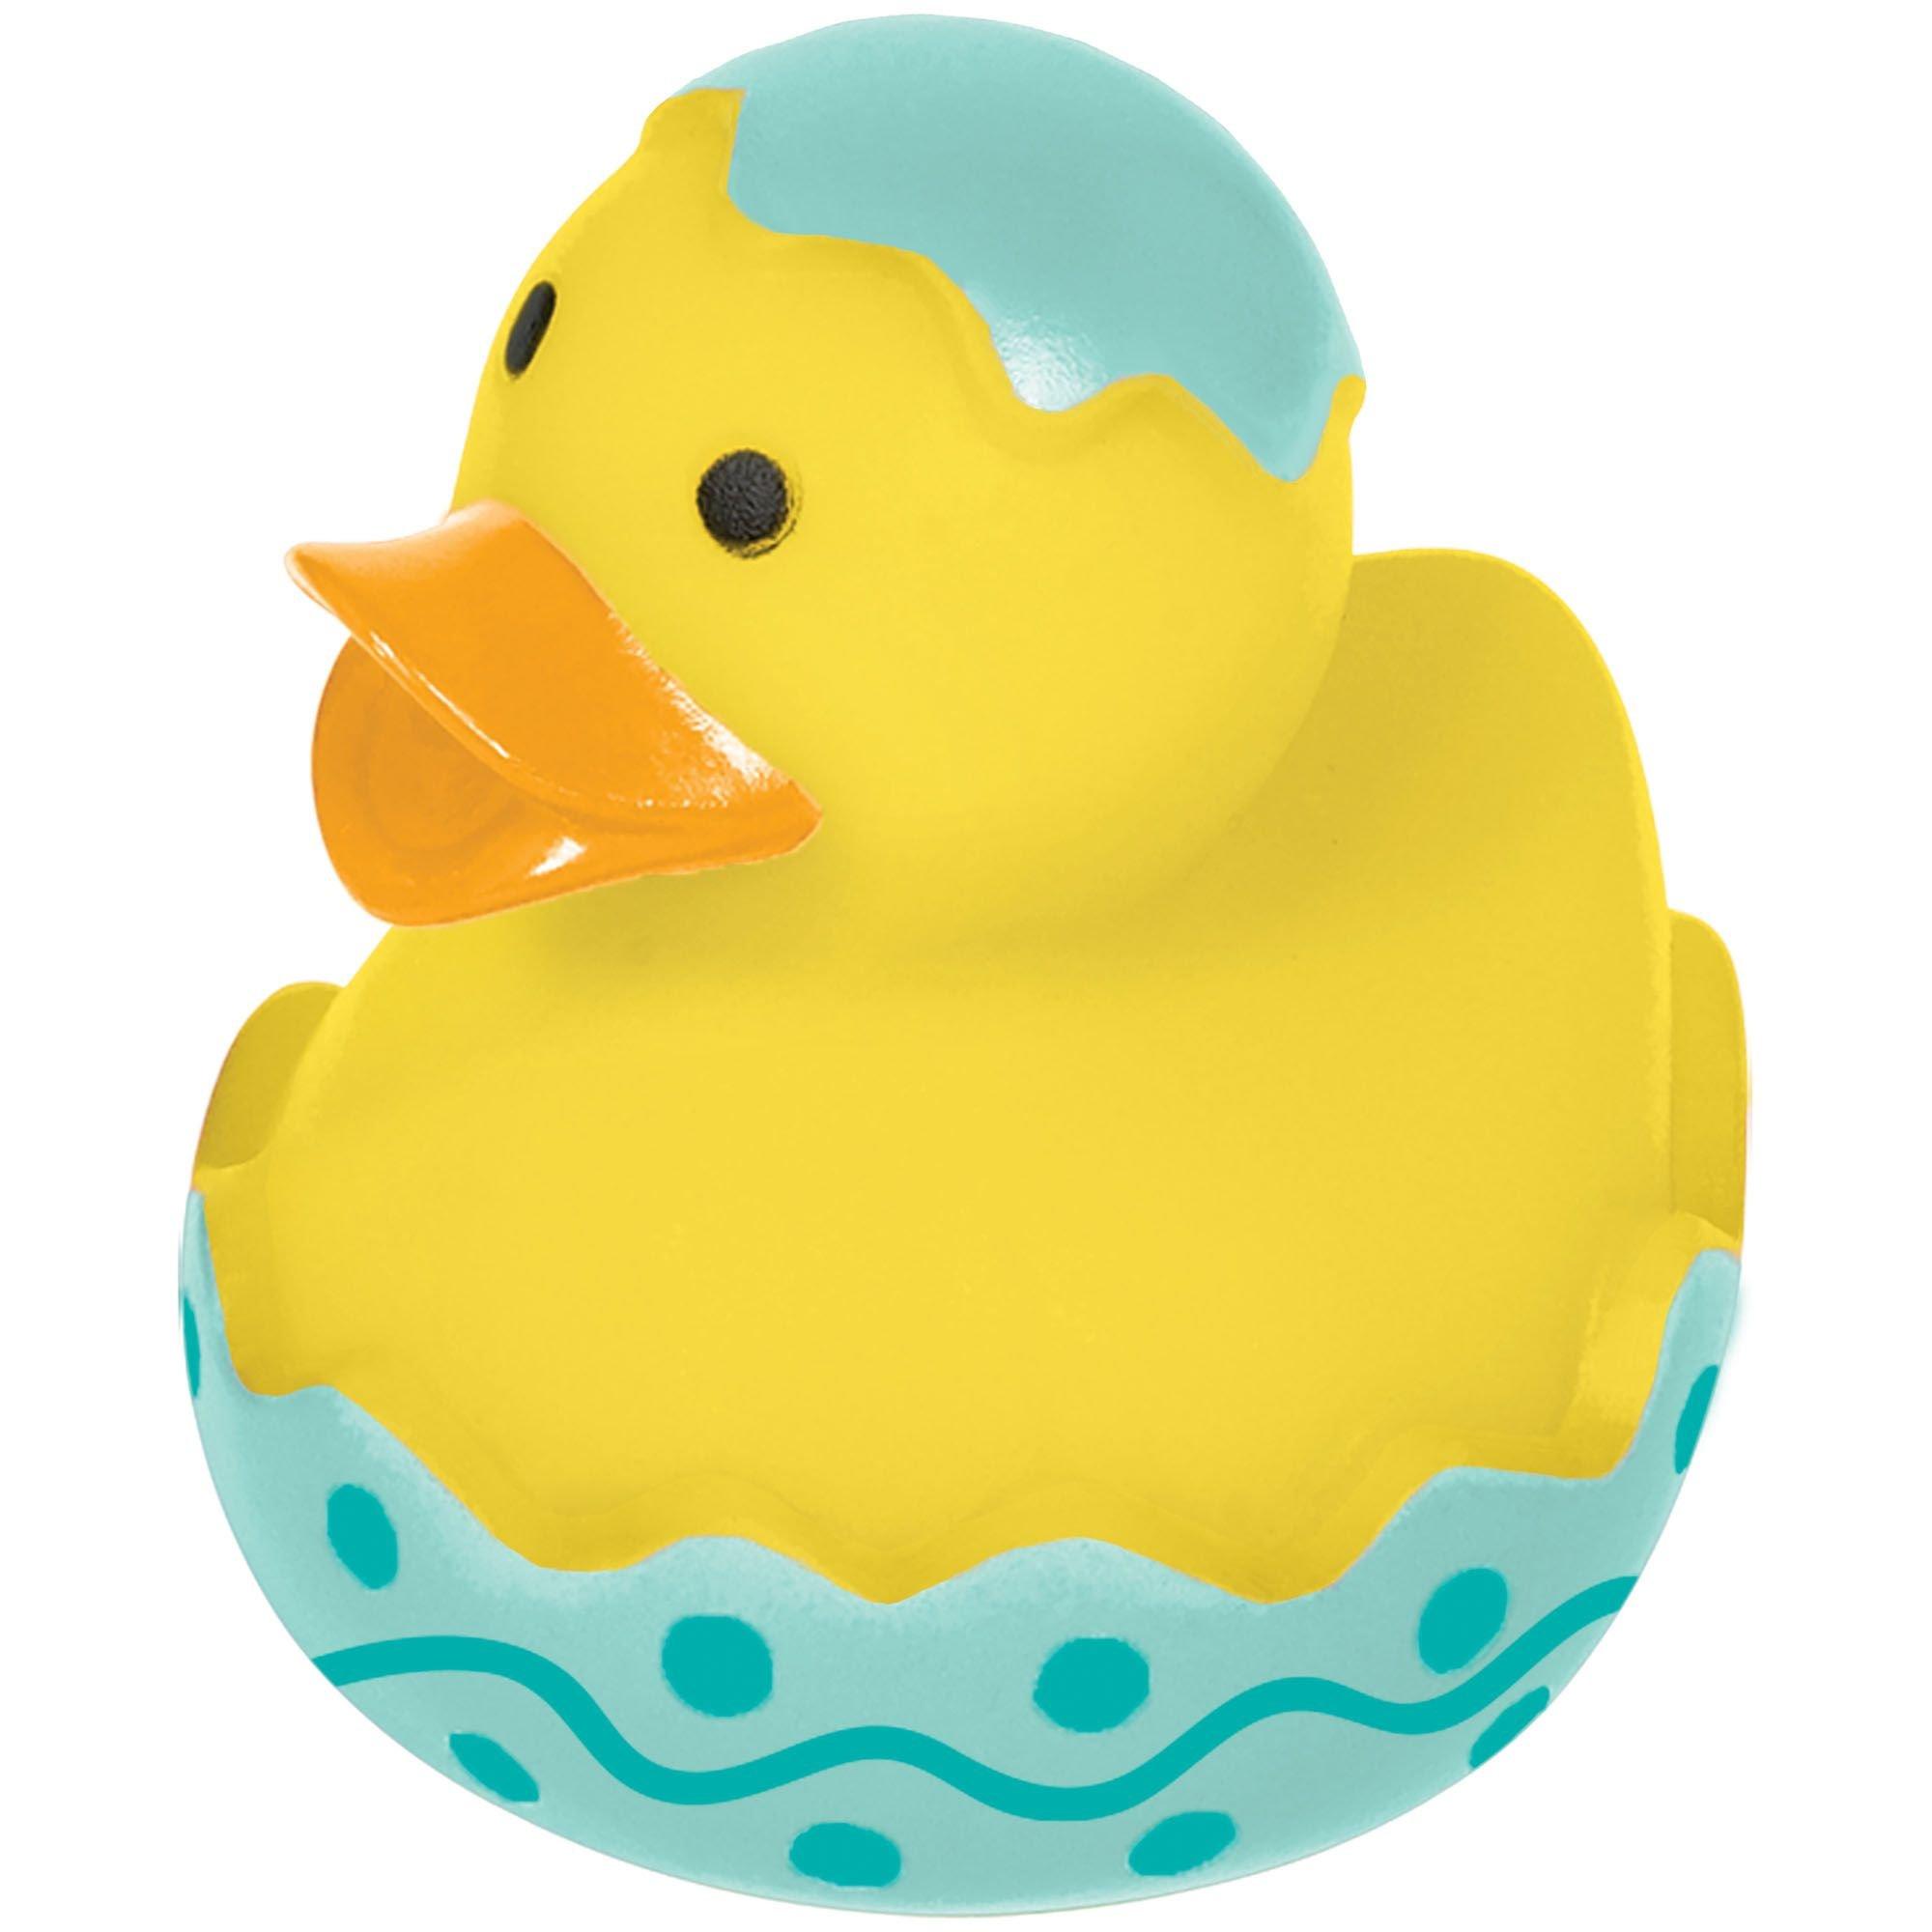 Large Rubber Duck - Canadian promotional products - My Next Promo